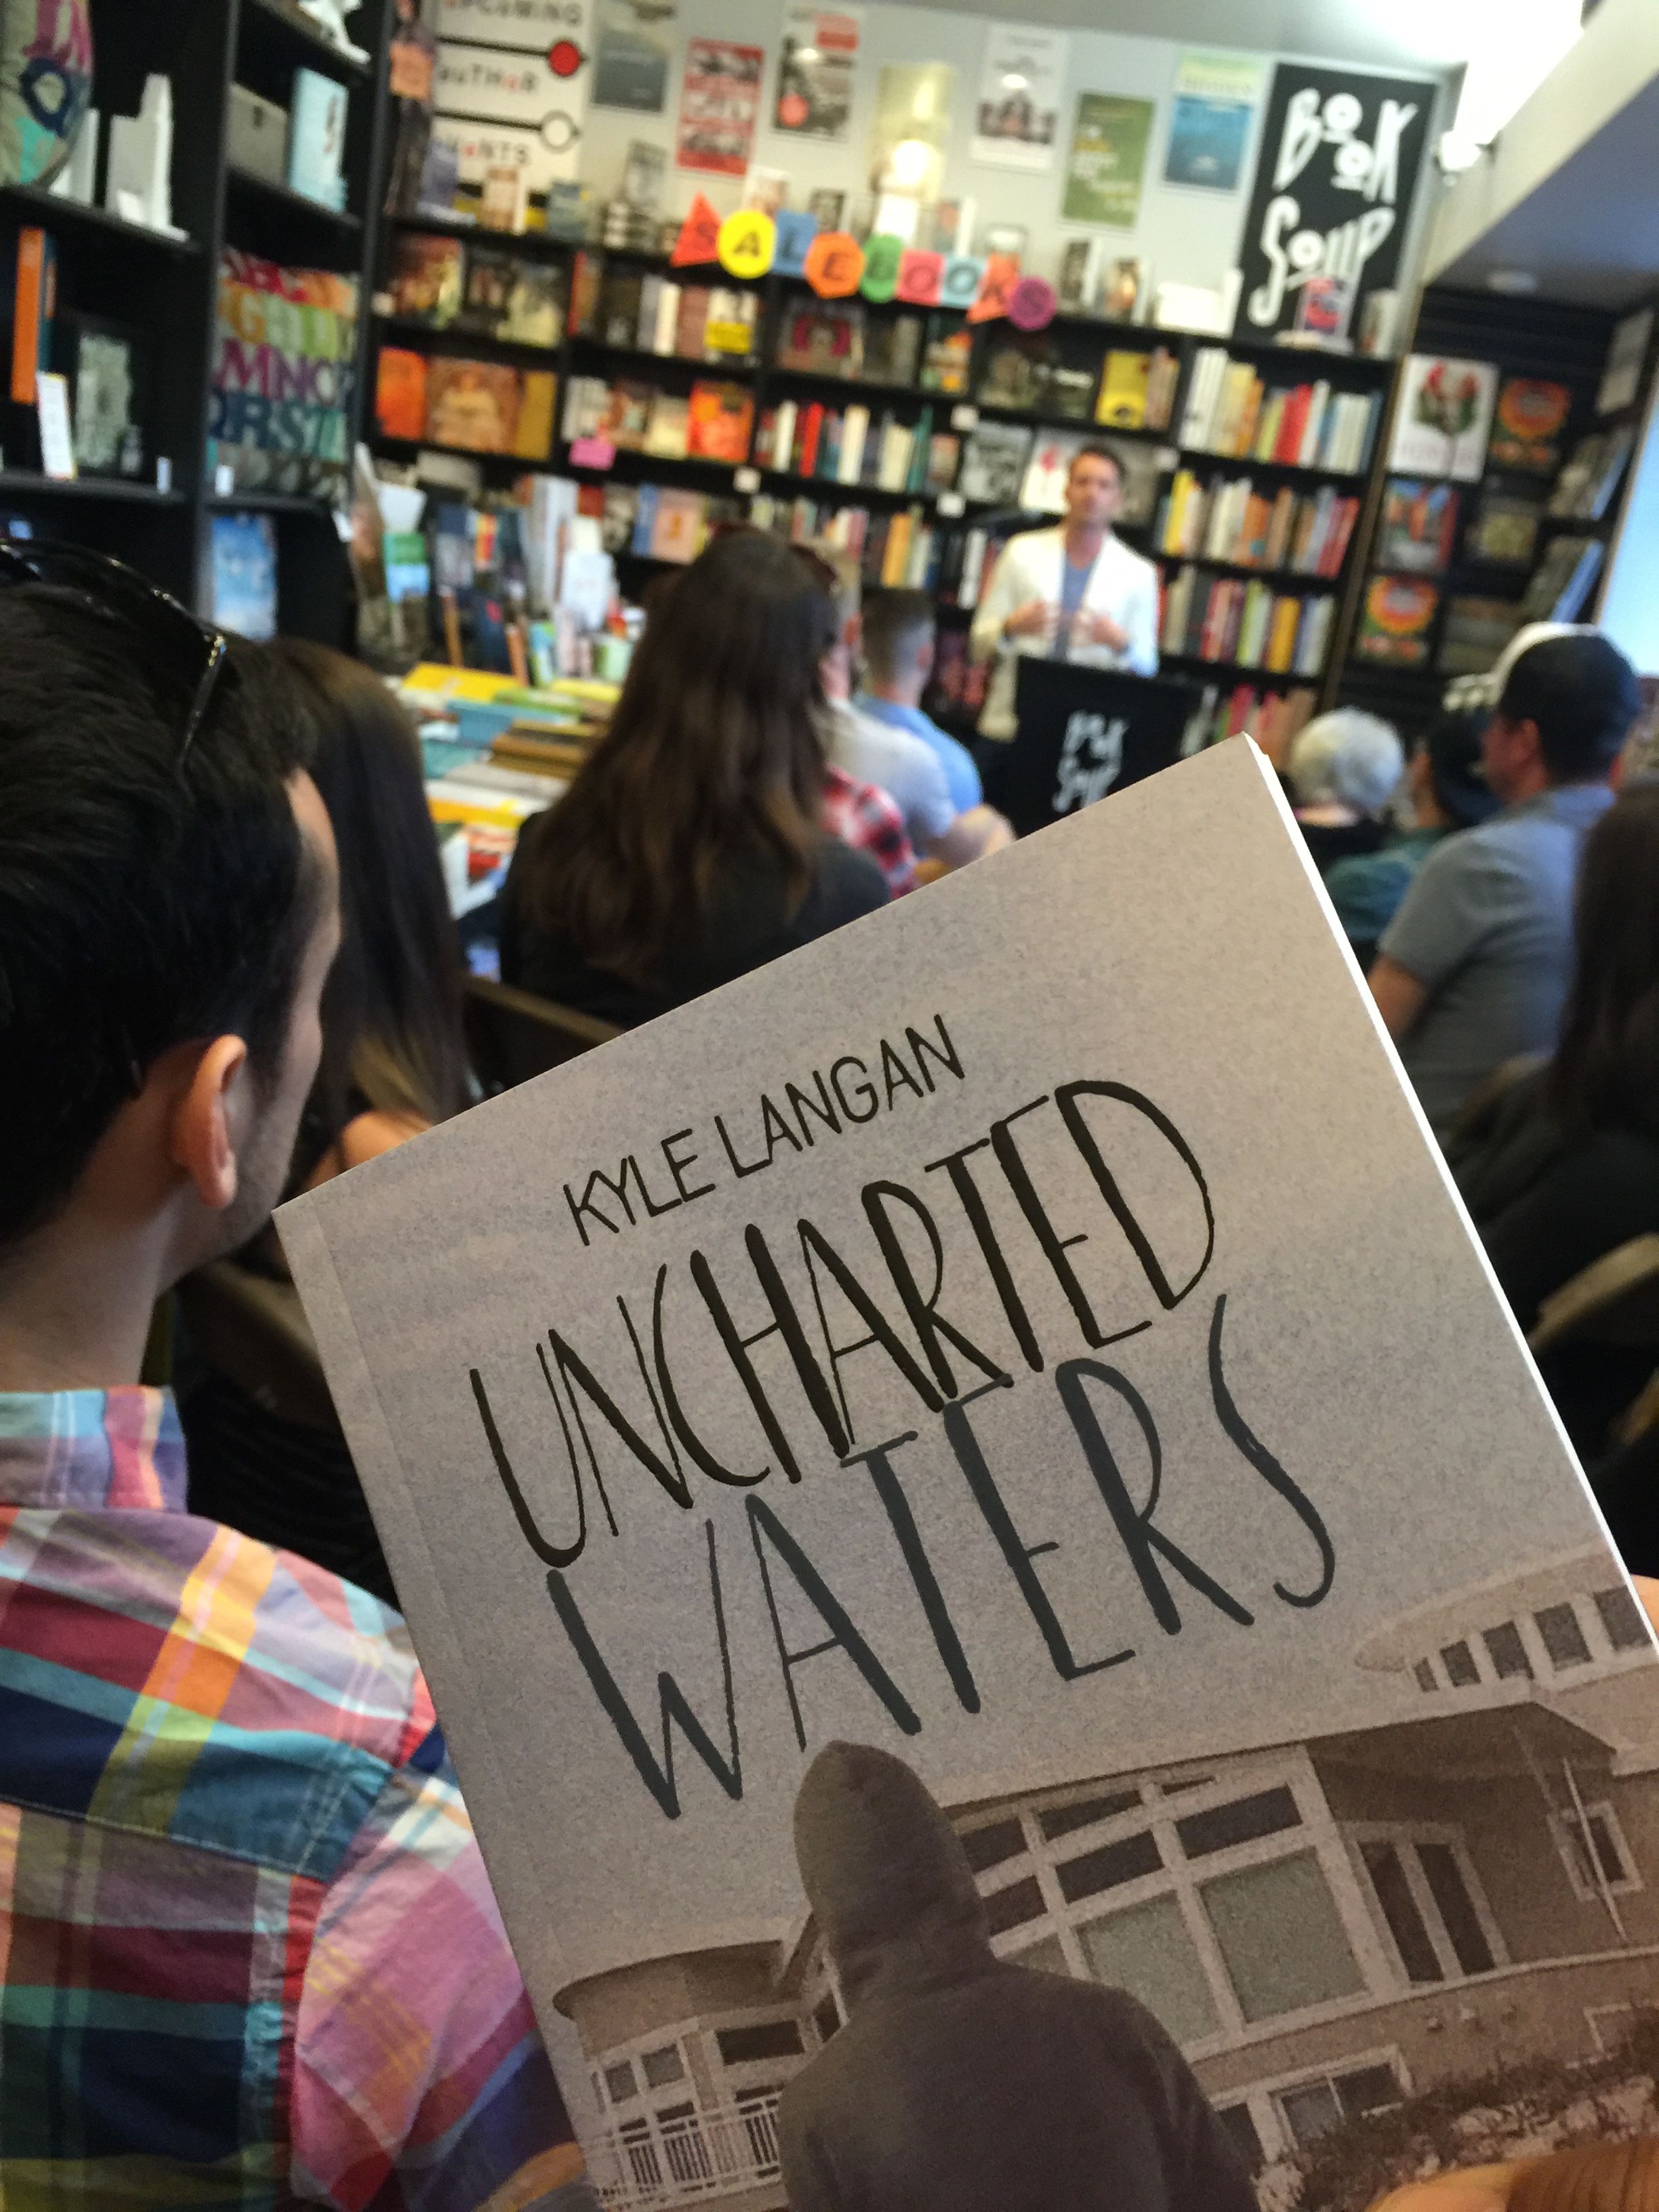 Uncharted Waters Book Signing